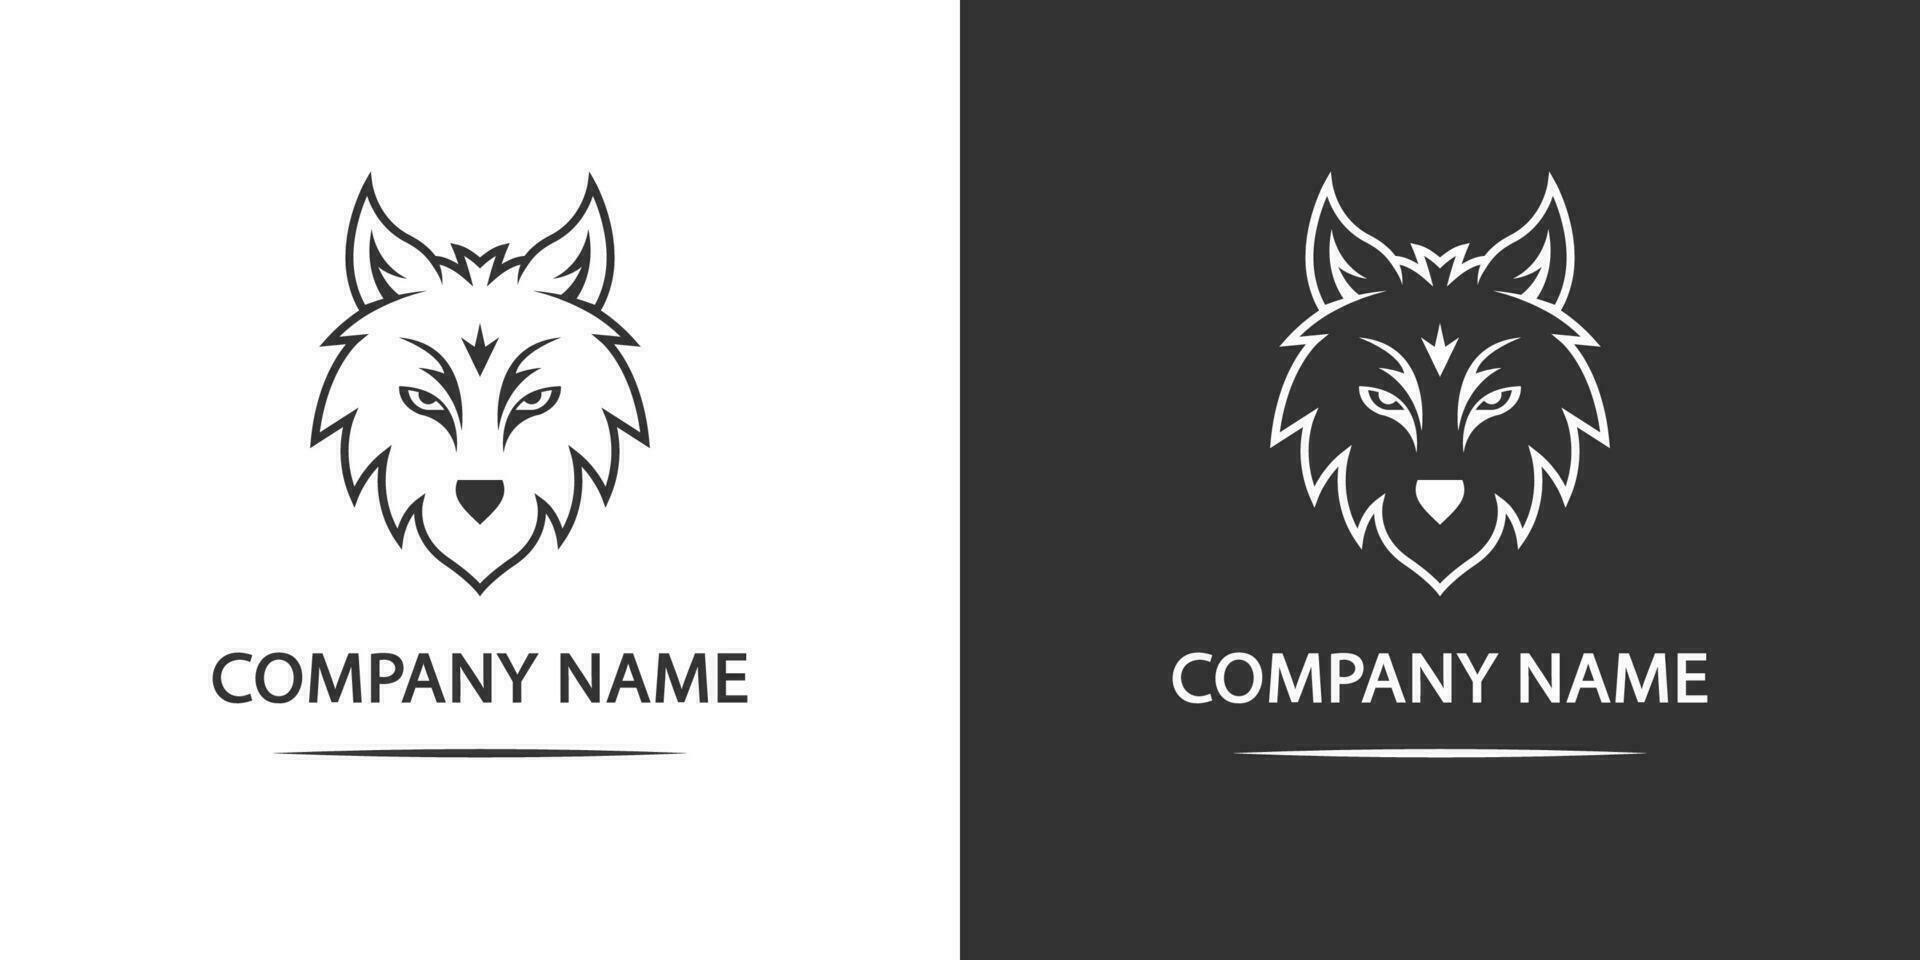 Wolf Company Minimalist Logo Wolf Minimalist Wolf Business Logo for Business Template Pro Vector Isolated Design Template.